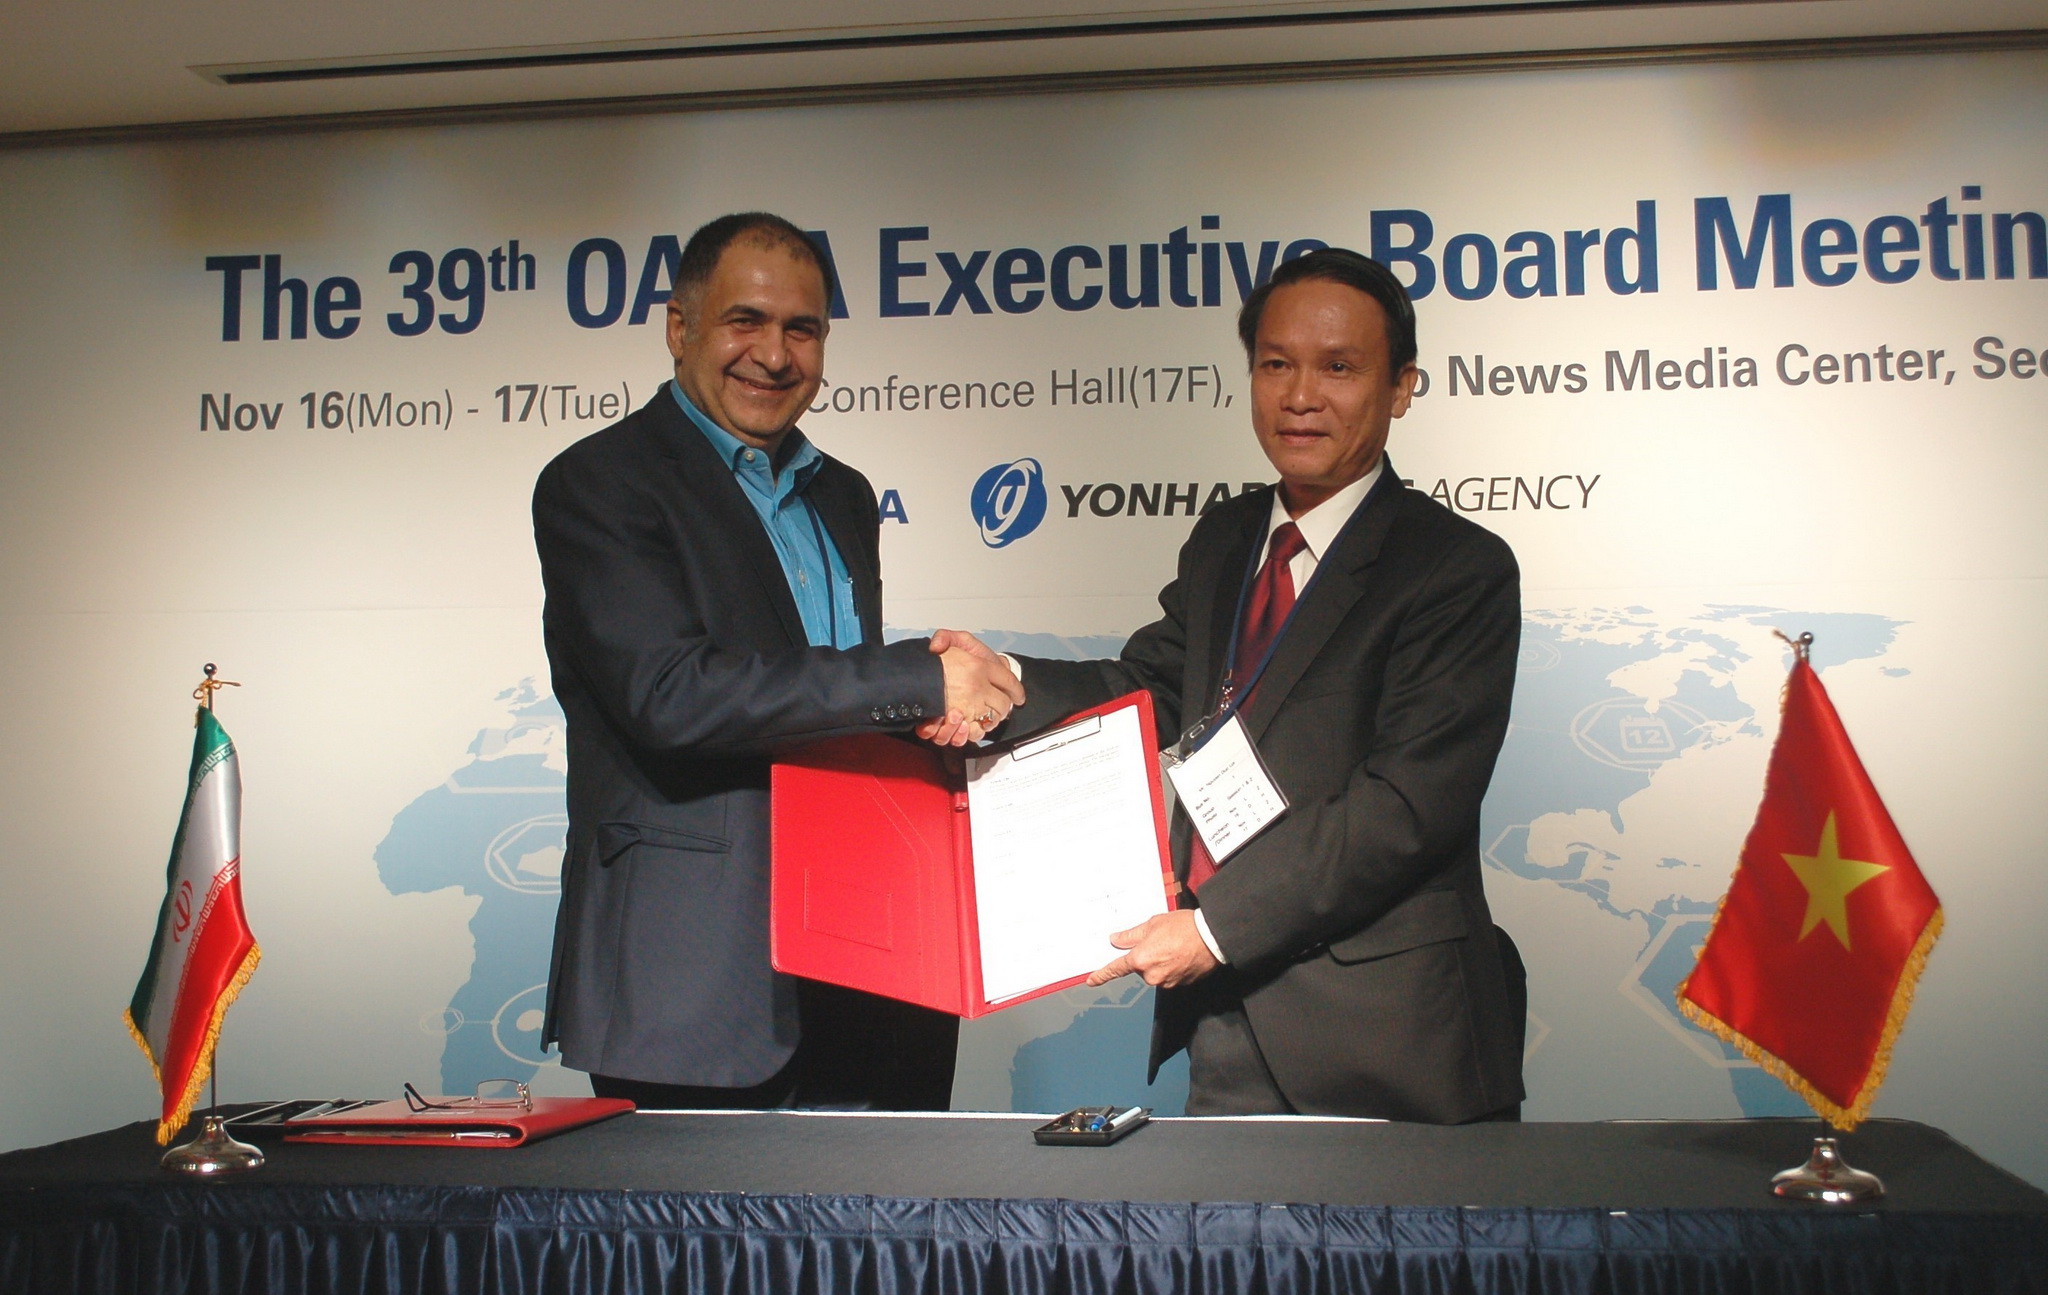 During his participation at the 39th OANA Executive Board Meeting from November 16-17, 2015 in Seoul, VNA General Director Nguyen Duc Loi (right) and Executive Director of Iran’s state news agency IRNA Mohammad Khodadi on November 16 signed an agreement on bilateral information exchange. Under the deal, the two sides will exchange visits and cooperate in journalism skills training, and provide necessary equipment. (Photo: VNA)